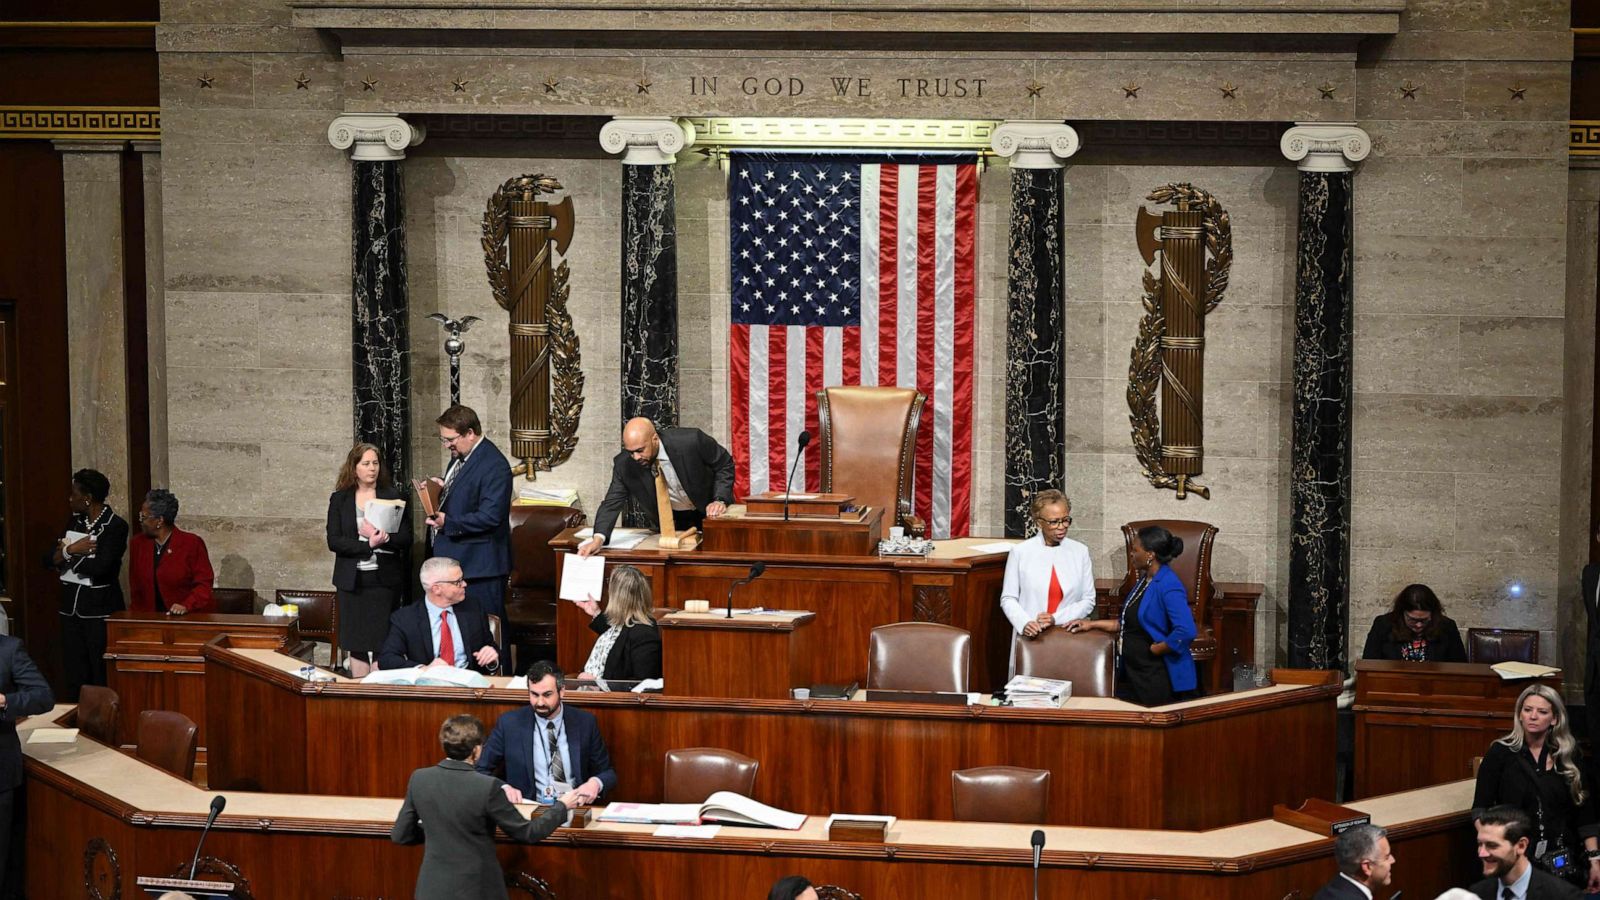 How the House Elects Its Speaker - Congressional Institute